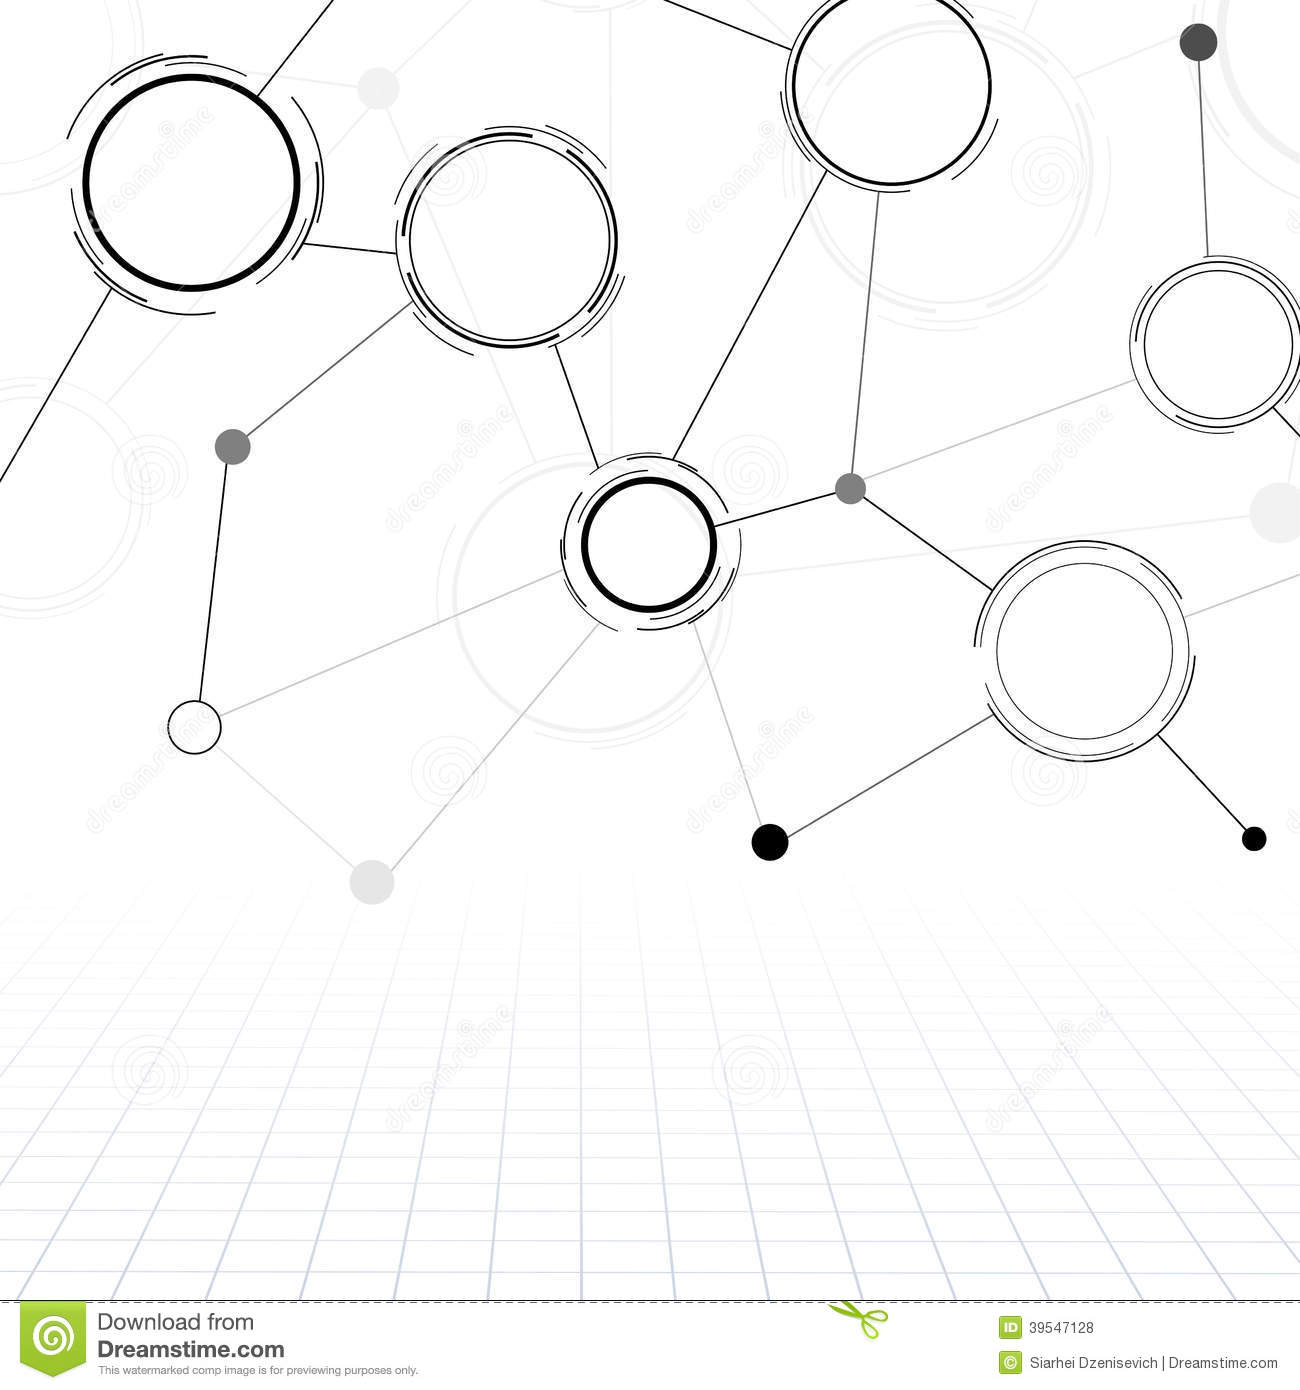     Communicational Networking Connections Stock Vector   Image  39547128